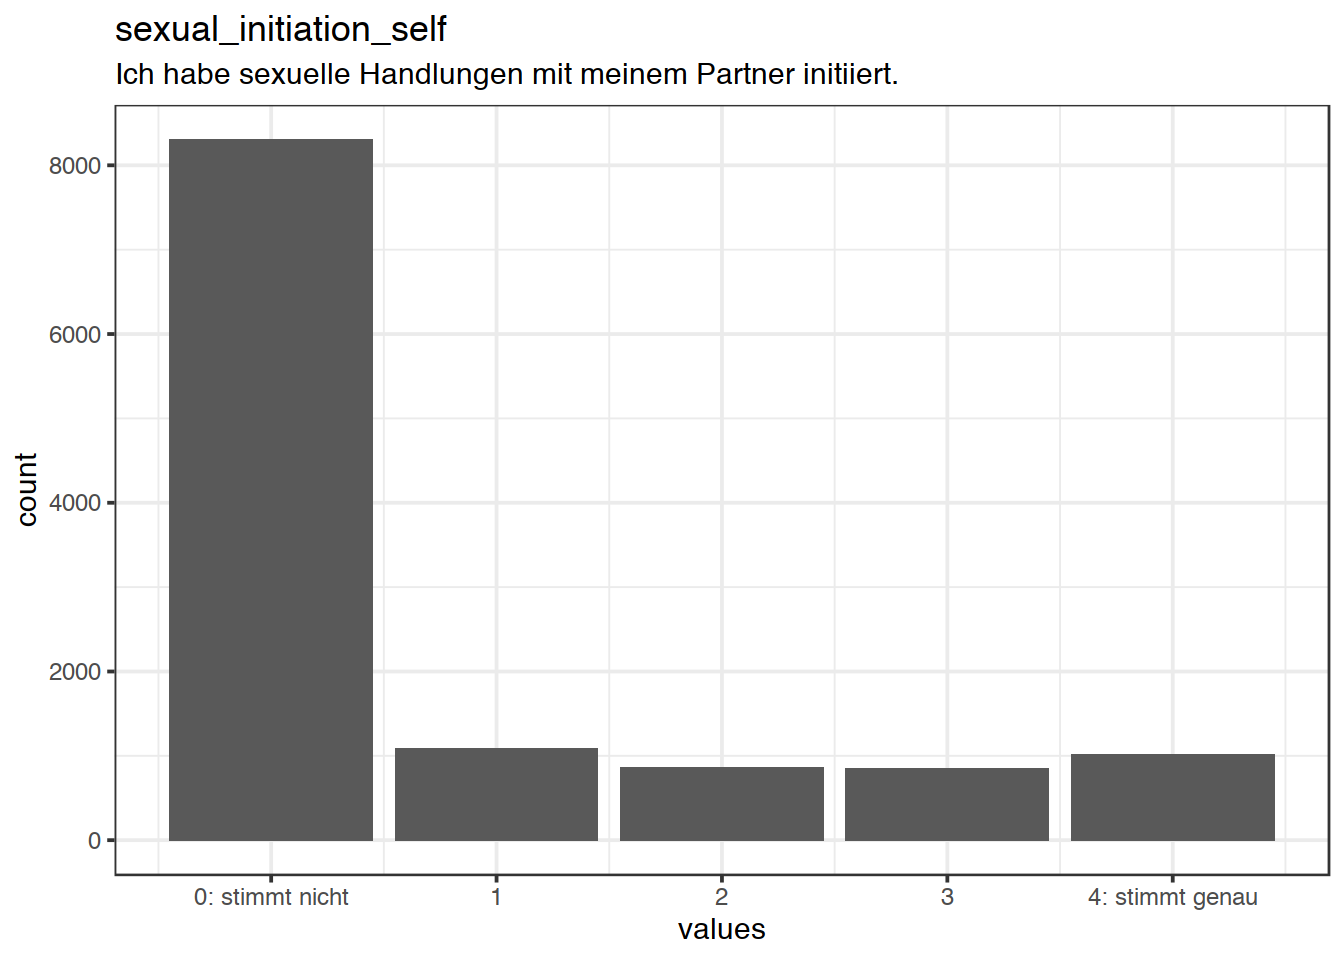 Distribution of values for sexual_initiation_self